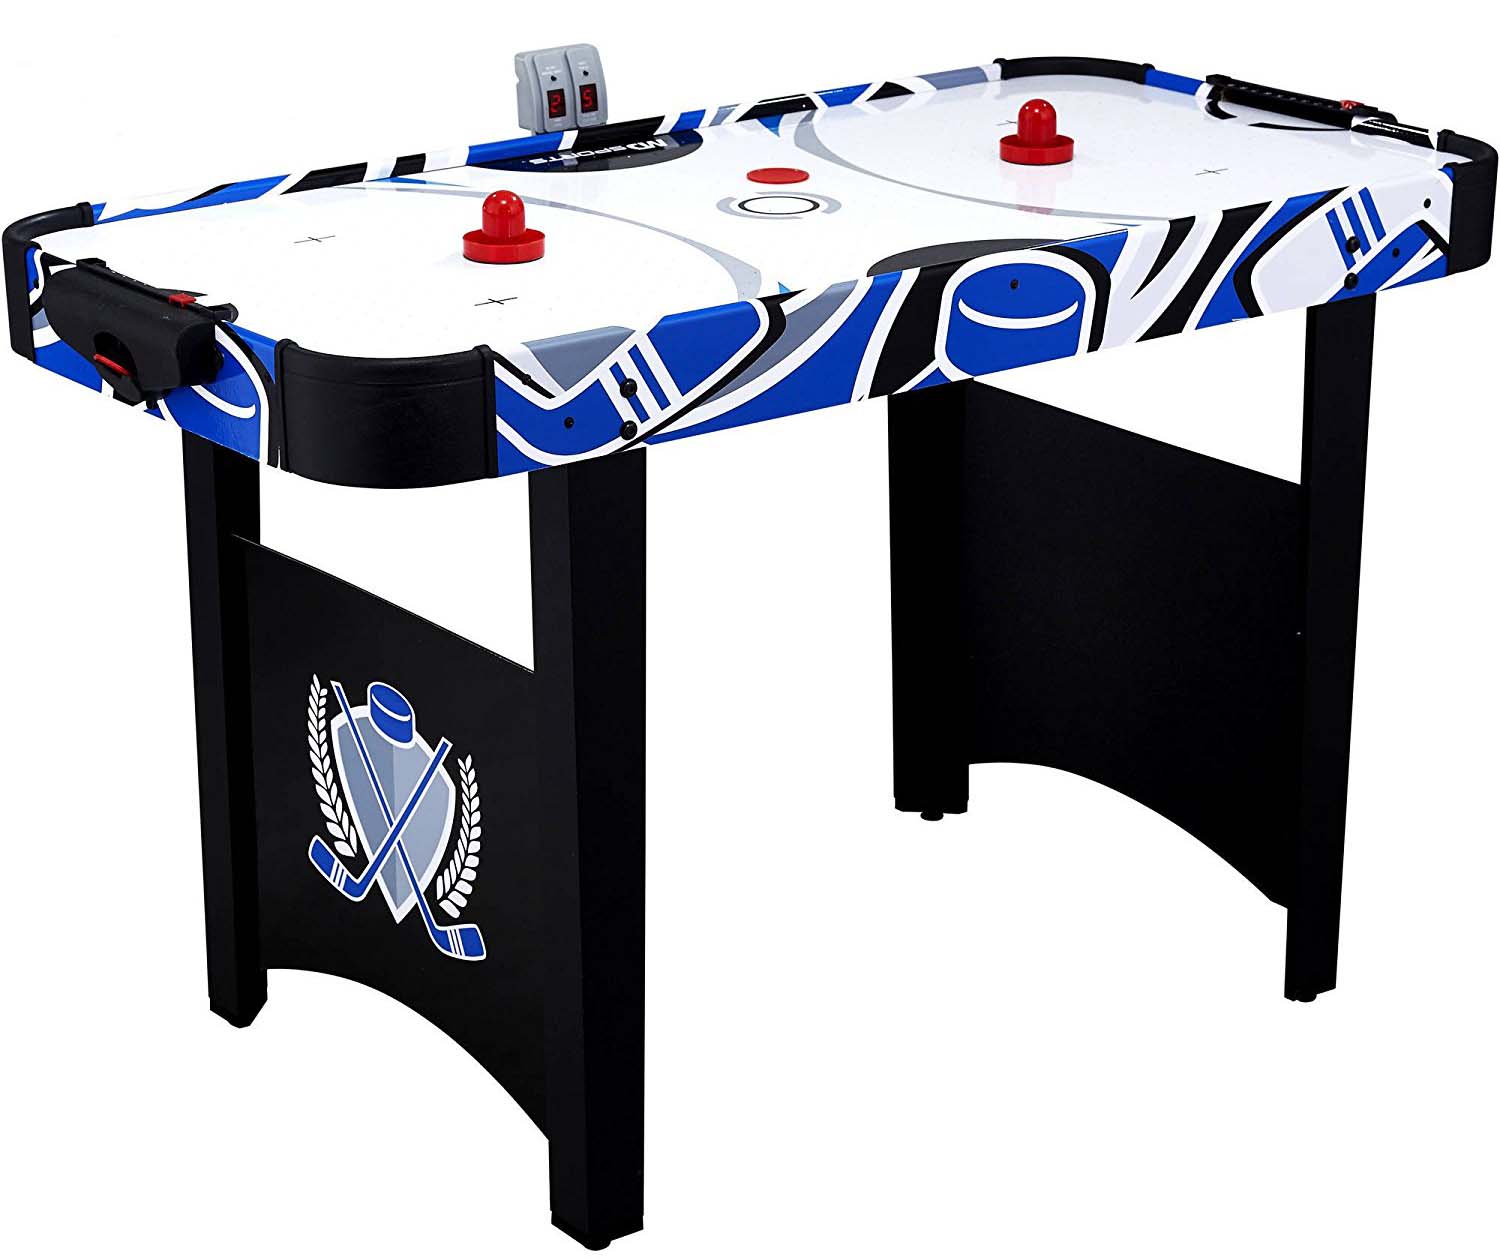 MD Sports Mind-Blowing Fun and Easy to Play for Kids Air Powered Hockey Table